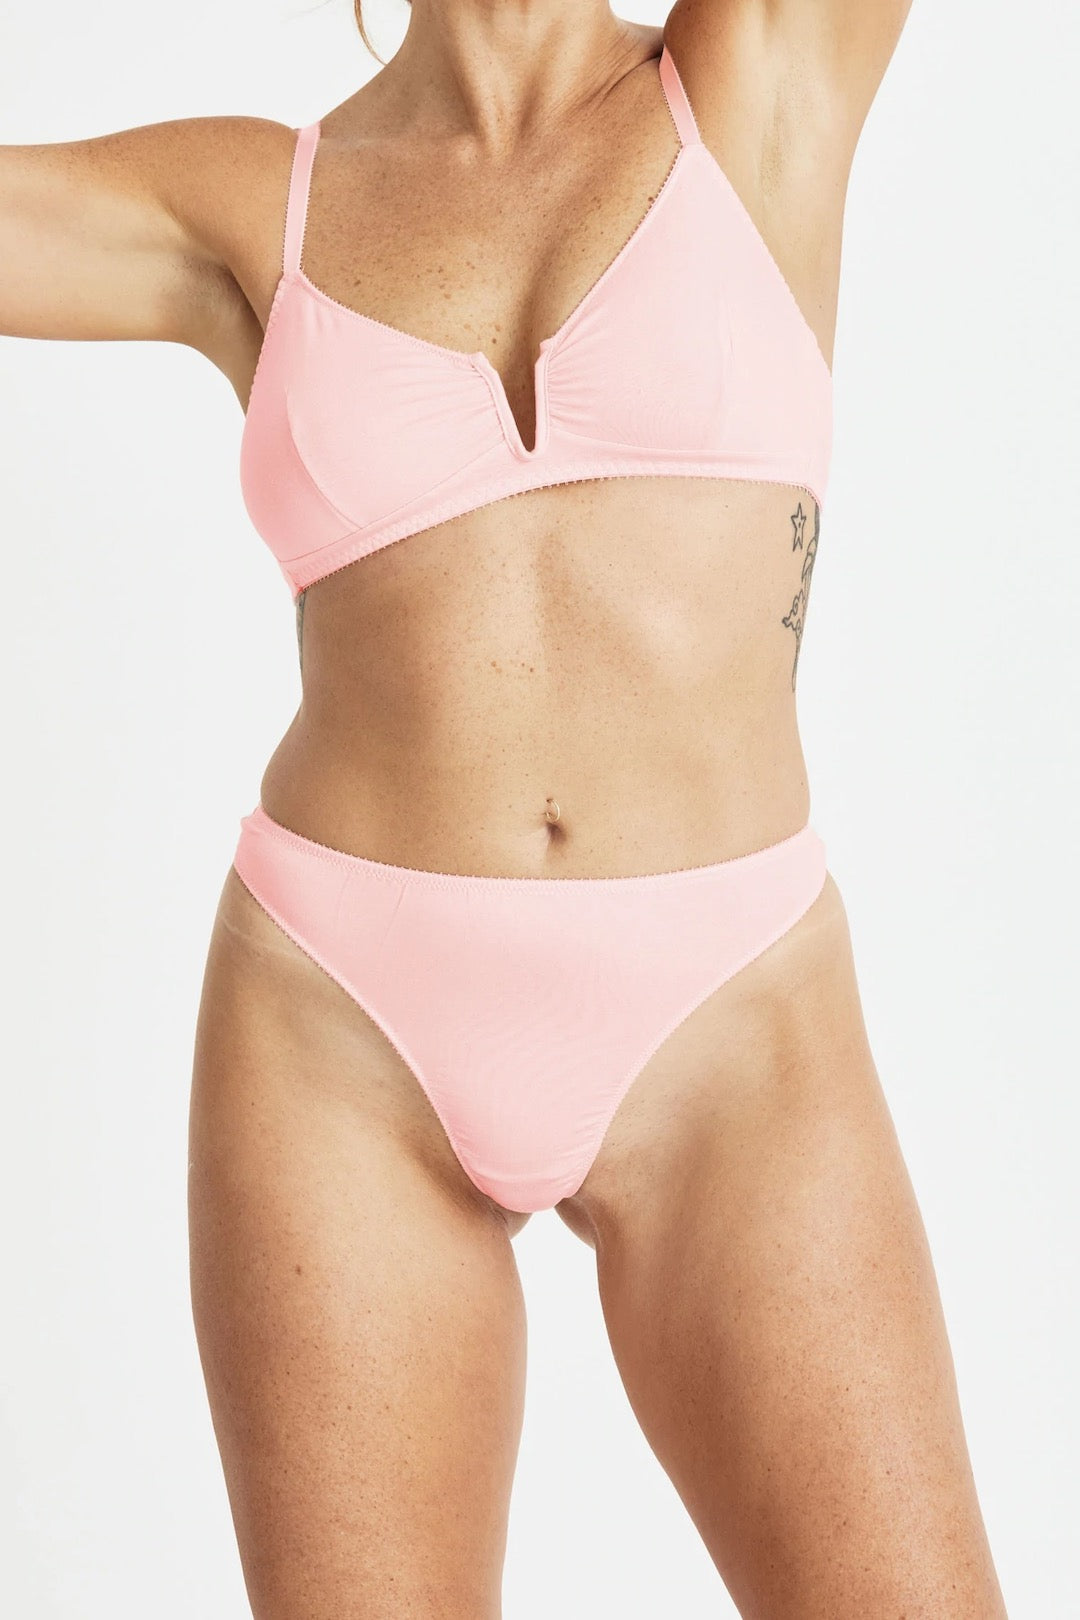 A woman in a Videris Whitney Bikini – Rosy top and bottom.